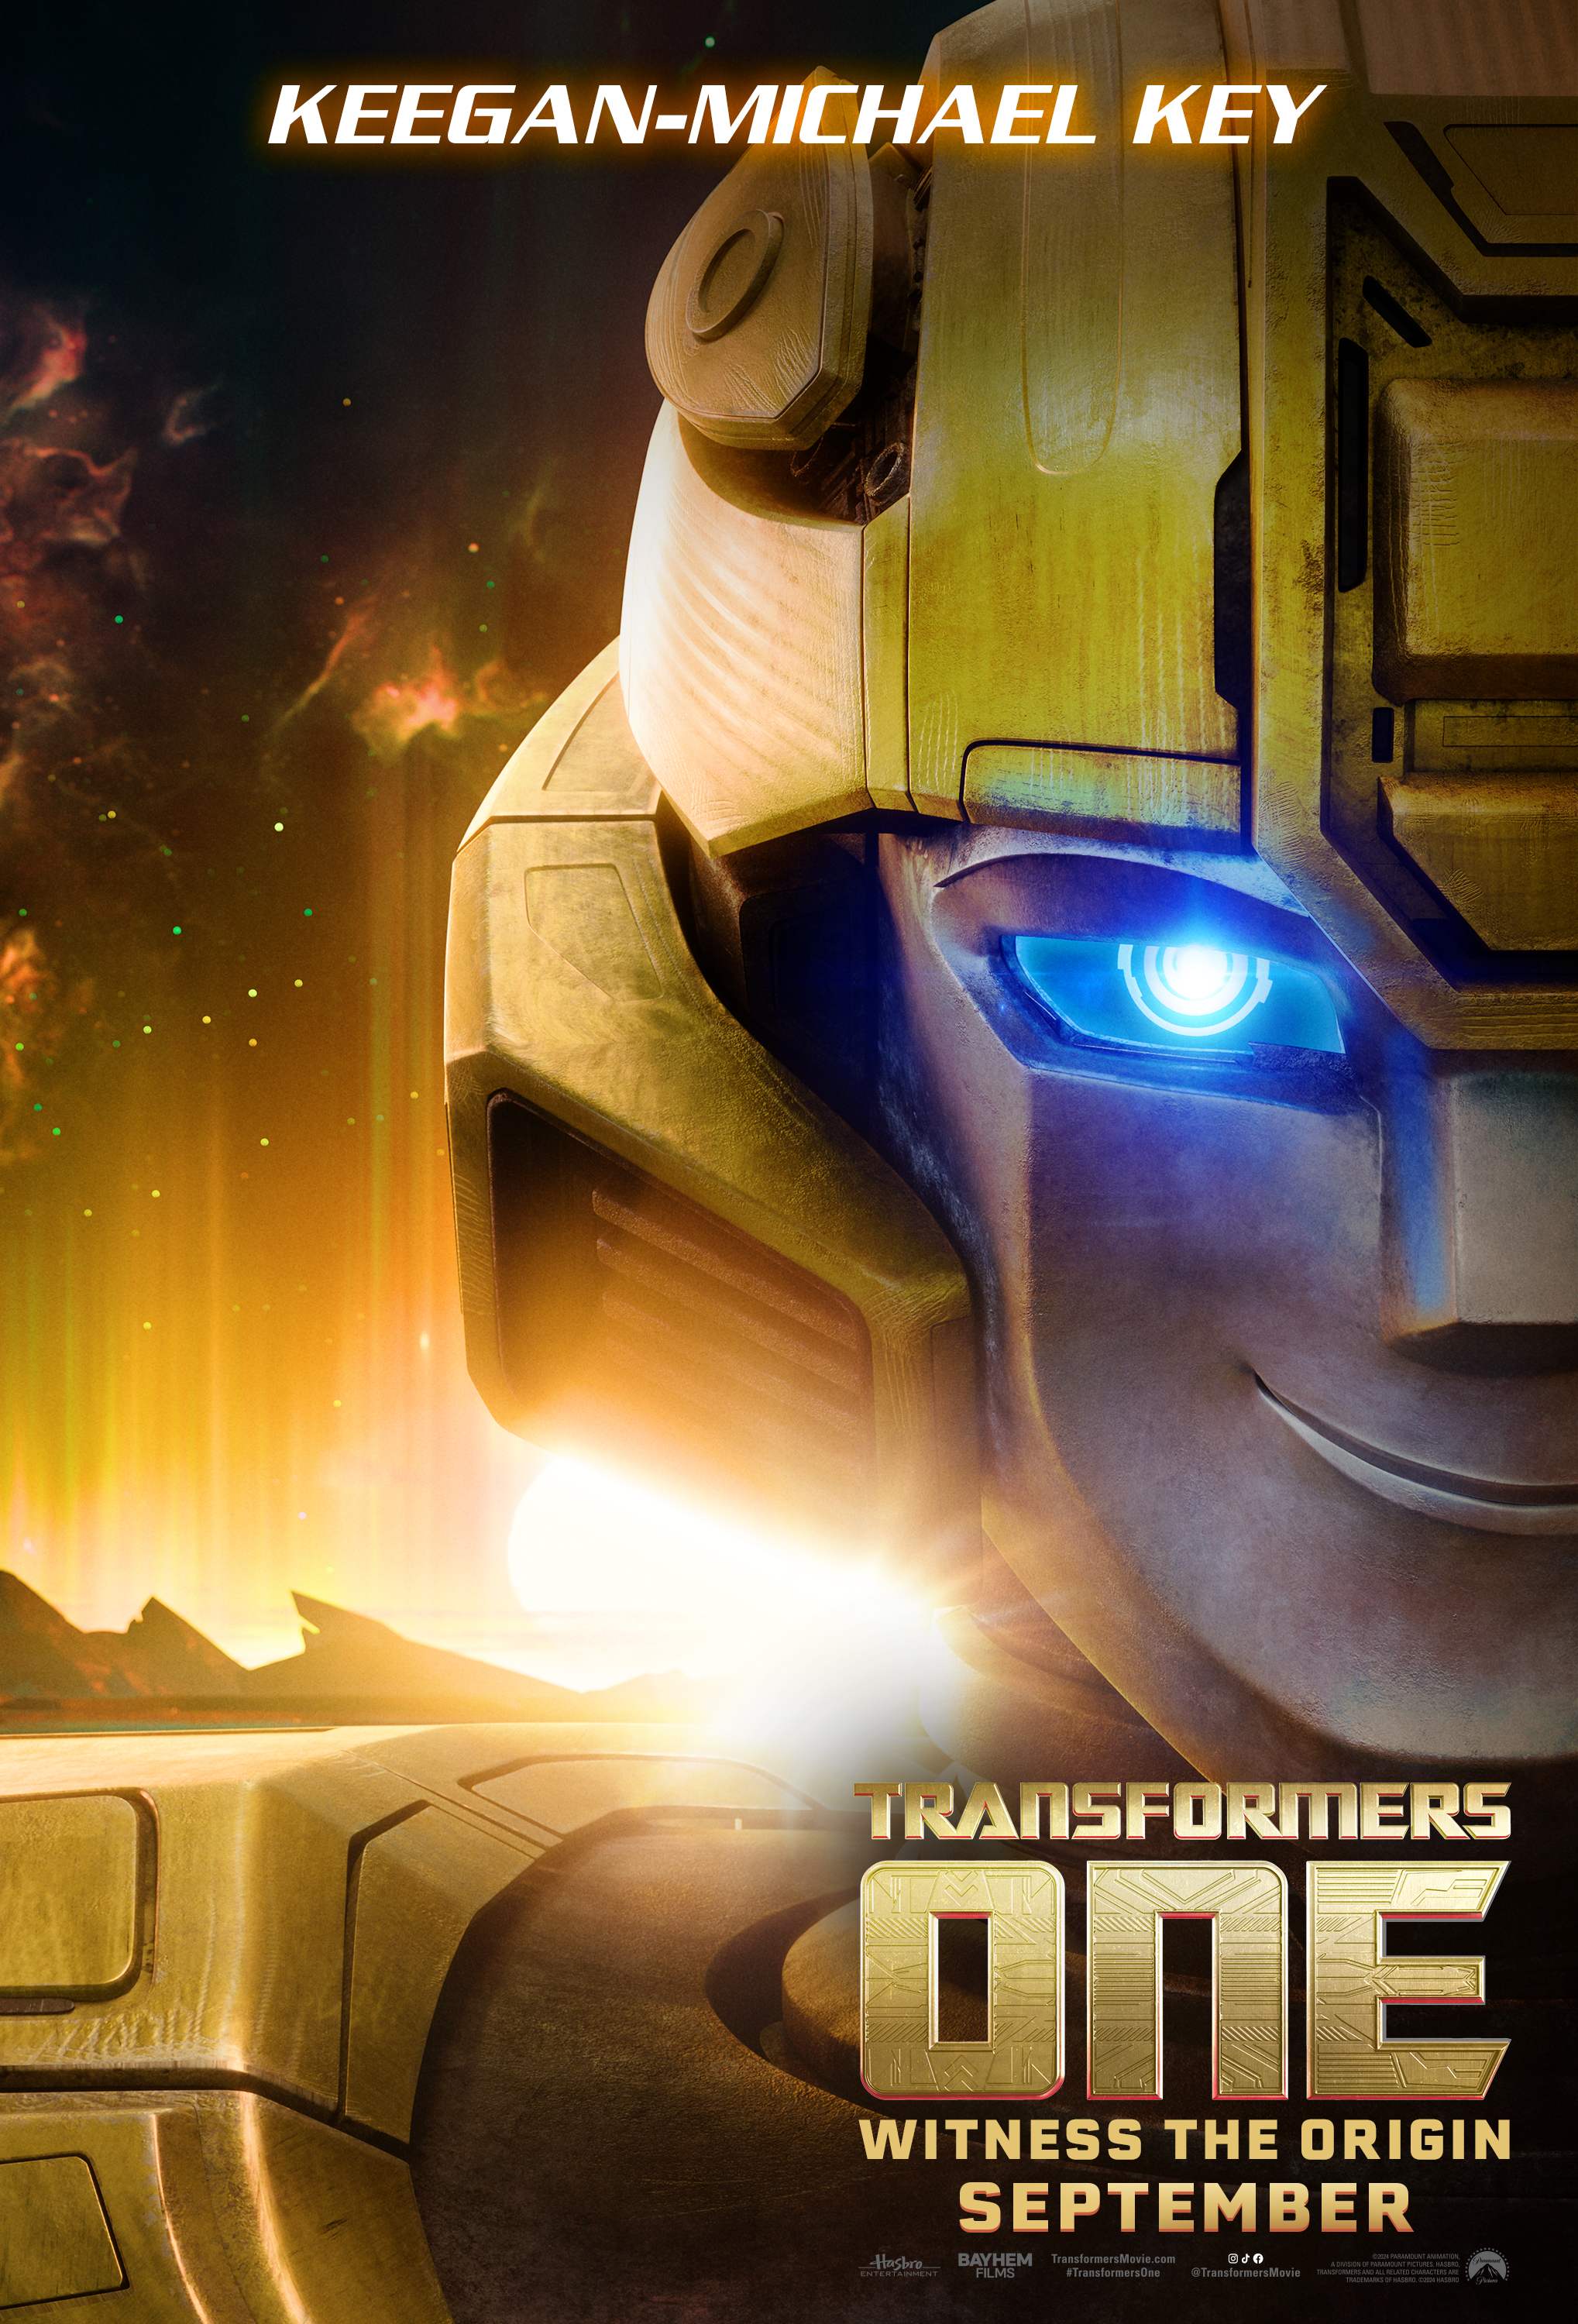 Transformers One Posters Showcase Star-Studded Cast for Origin Movie